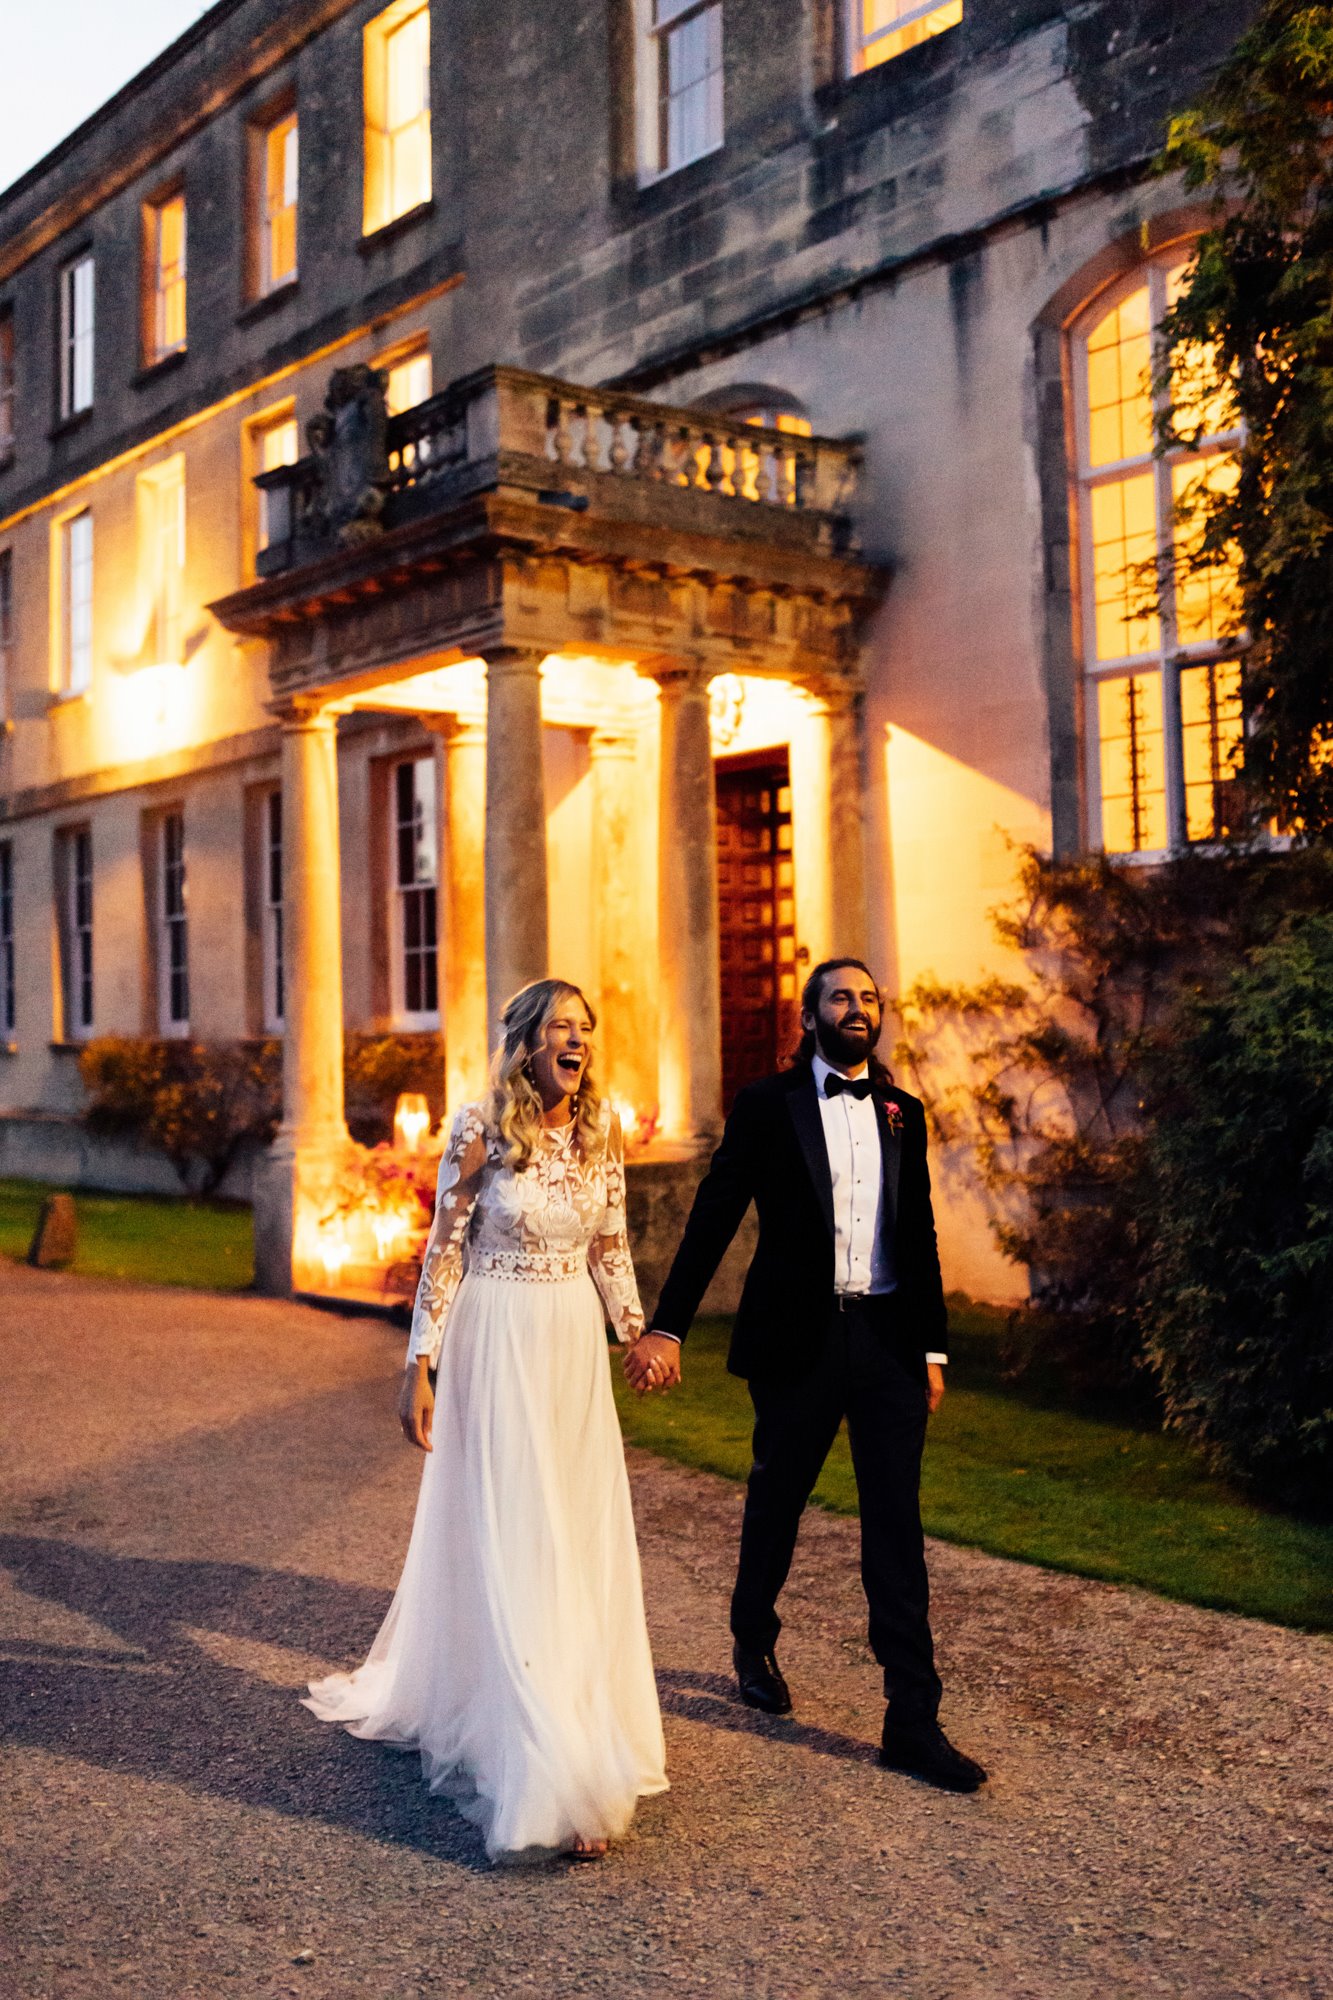 cool couple outside stately home wedding venue